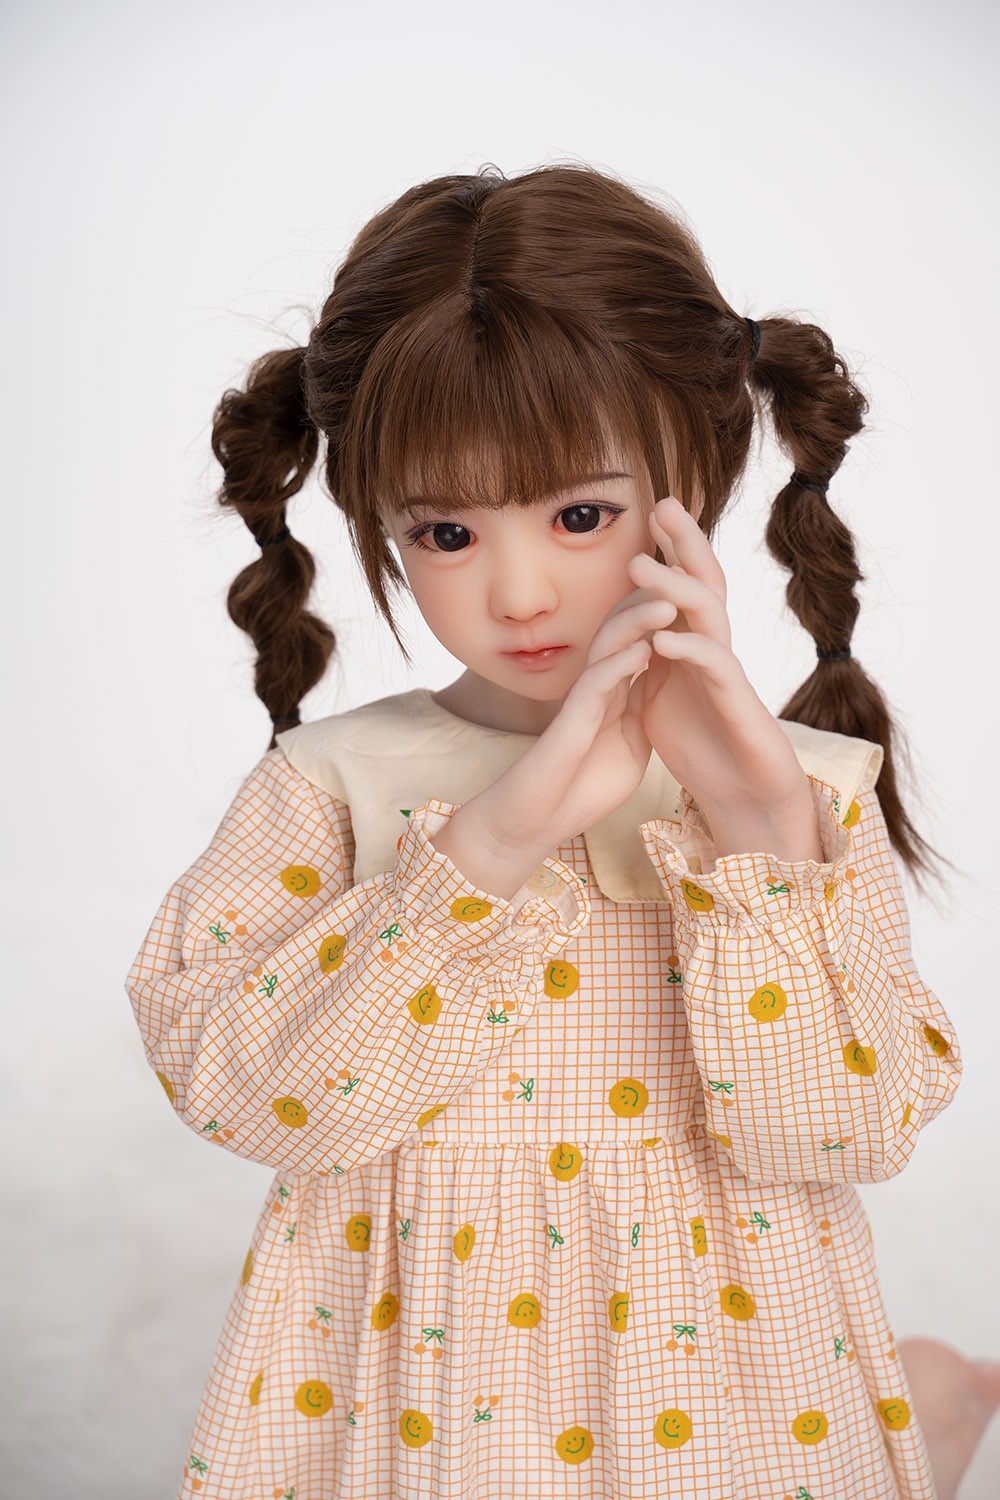  life-size love doll